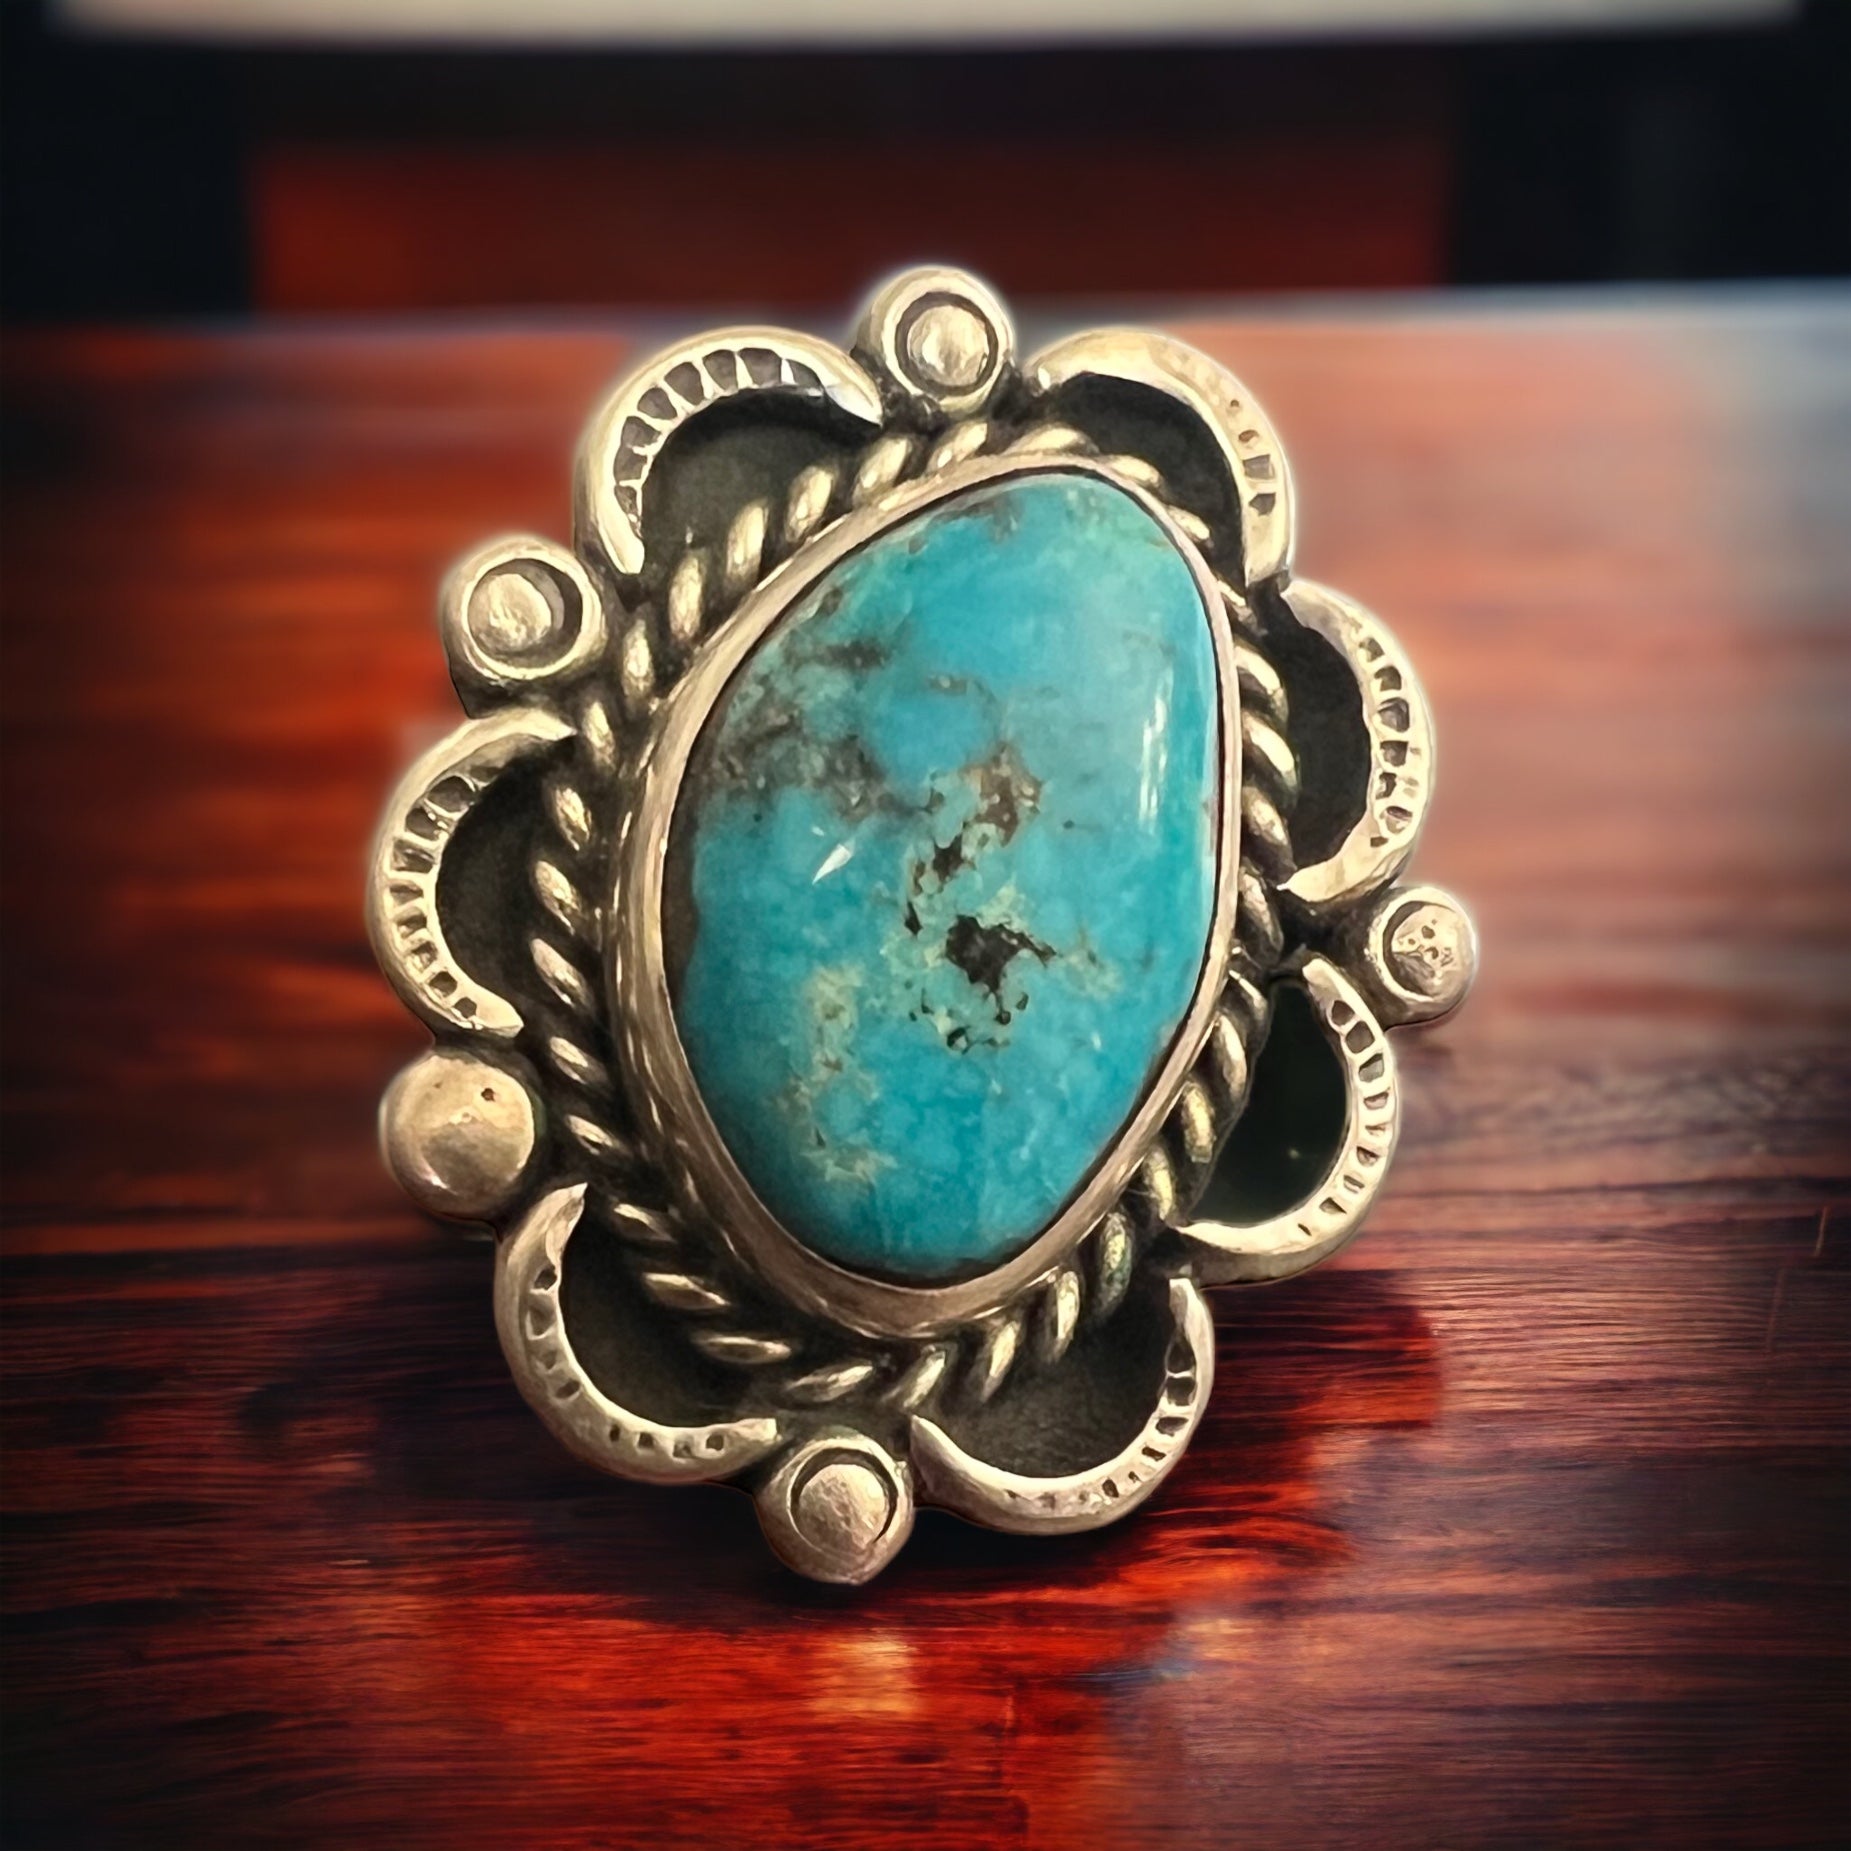 Vintage Cabochon Turquoise Flower Ring